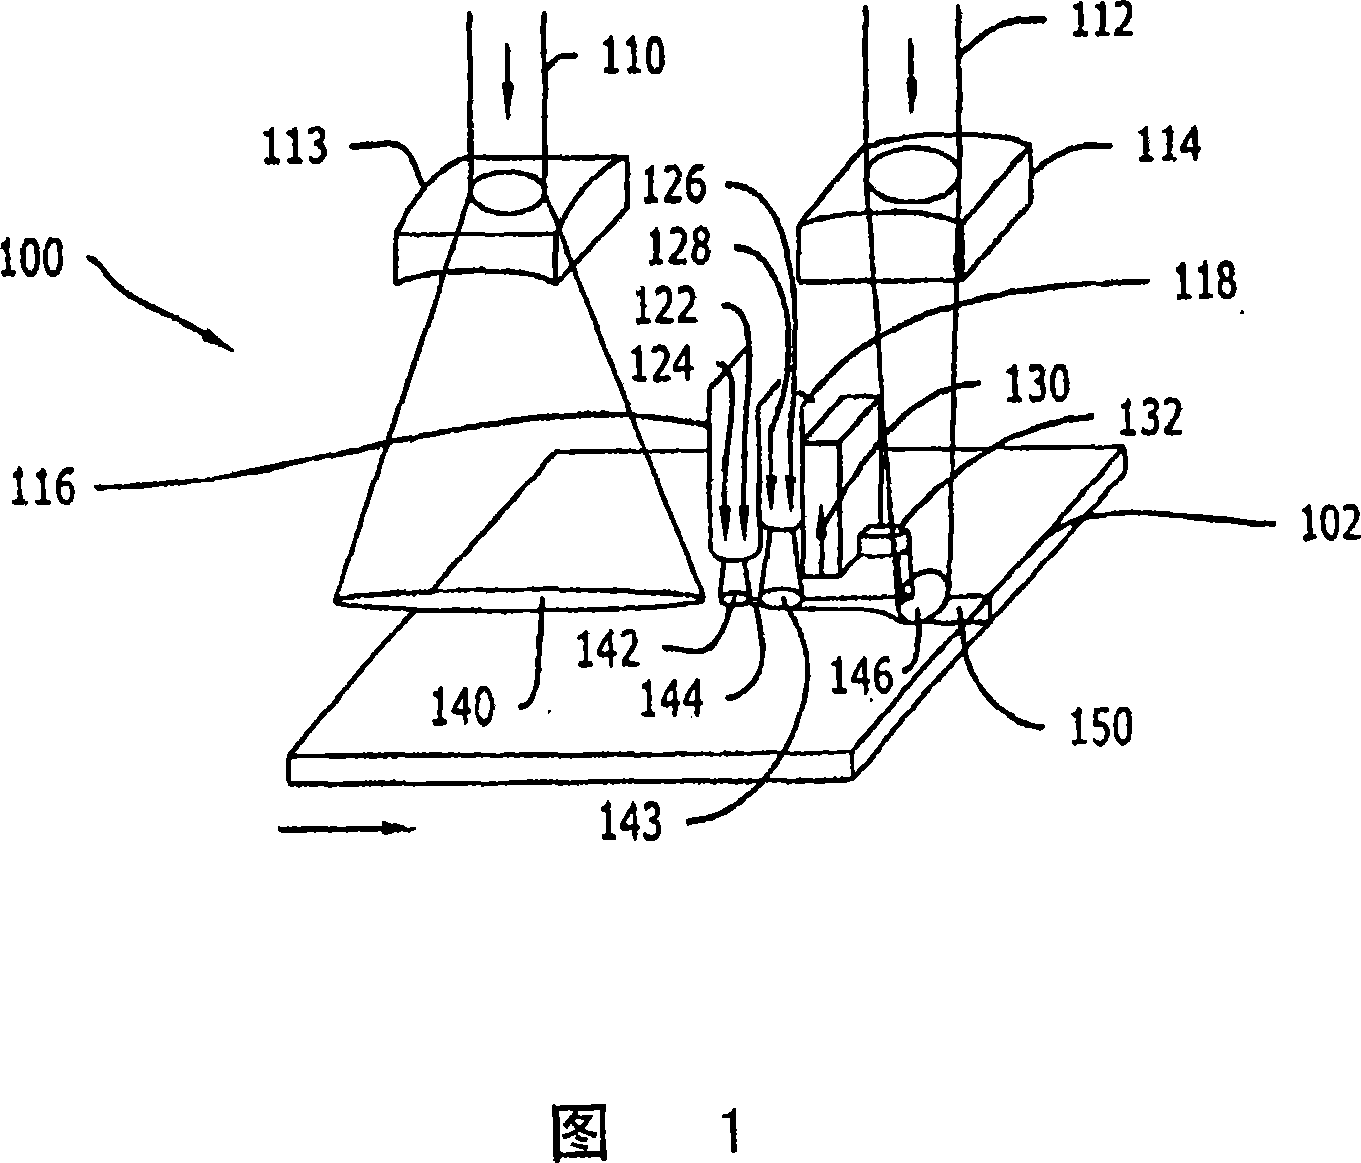 Device, system and method for cutting, cleaving or separating a substrate material